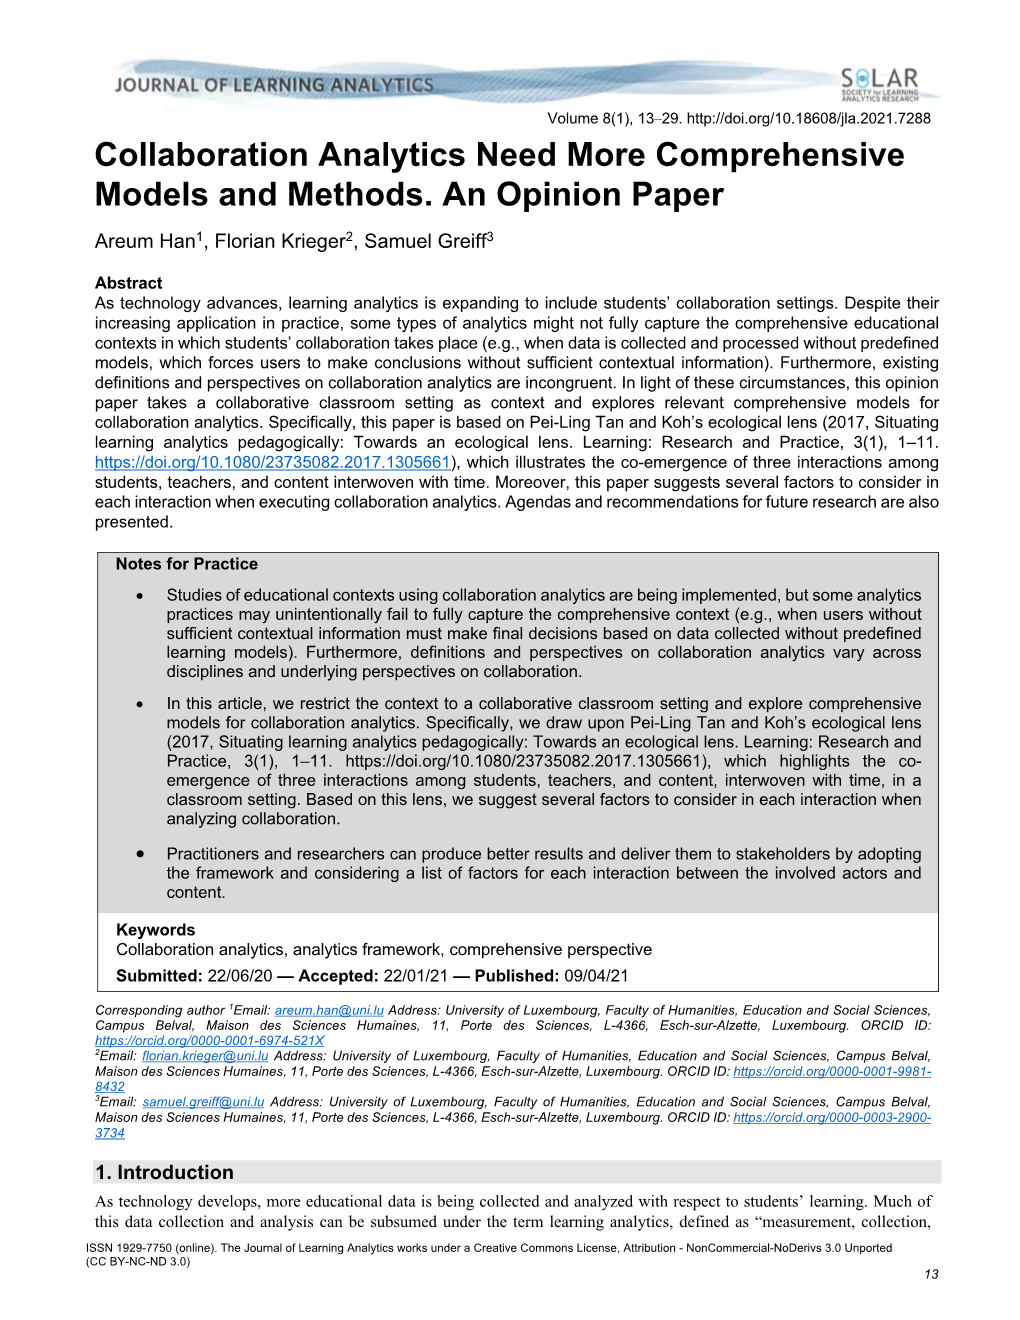 Collaboration Analytics Need More Comprehensive Models and Methods. an Opinion Paper Areum Han1, Florian Krieger2, Samuel Greiff3